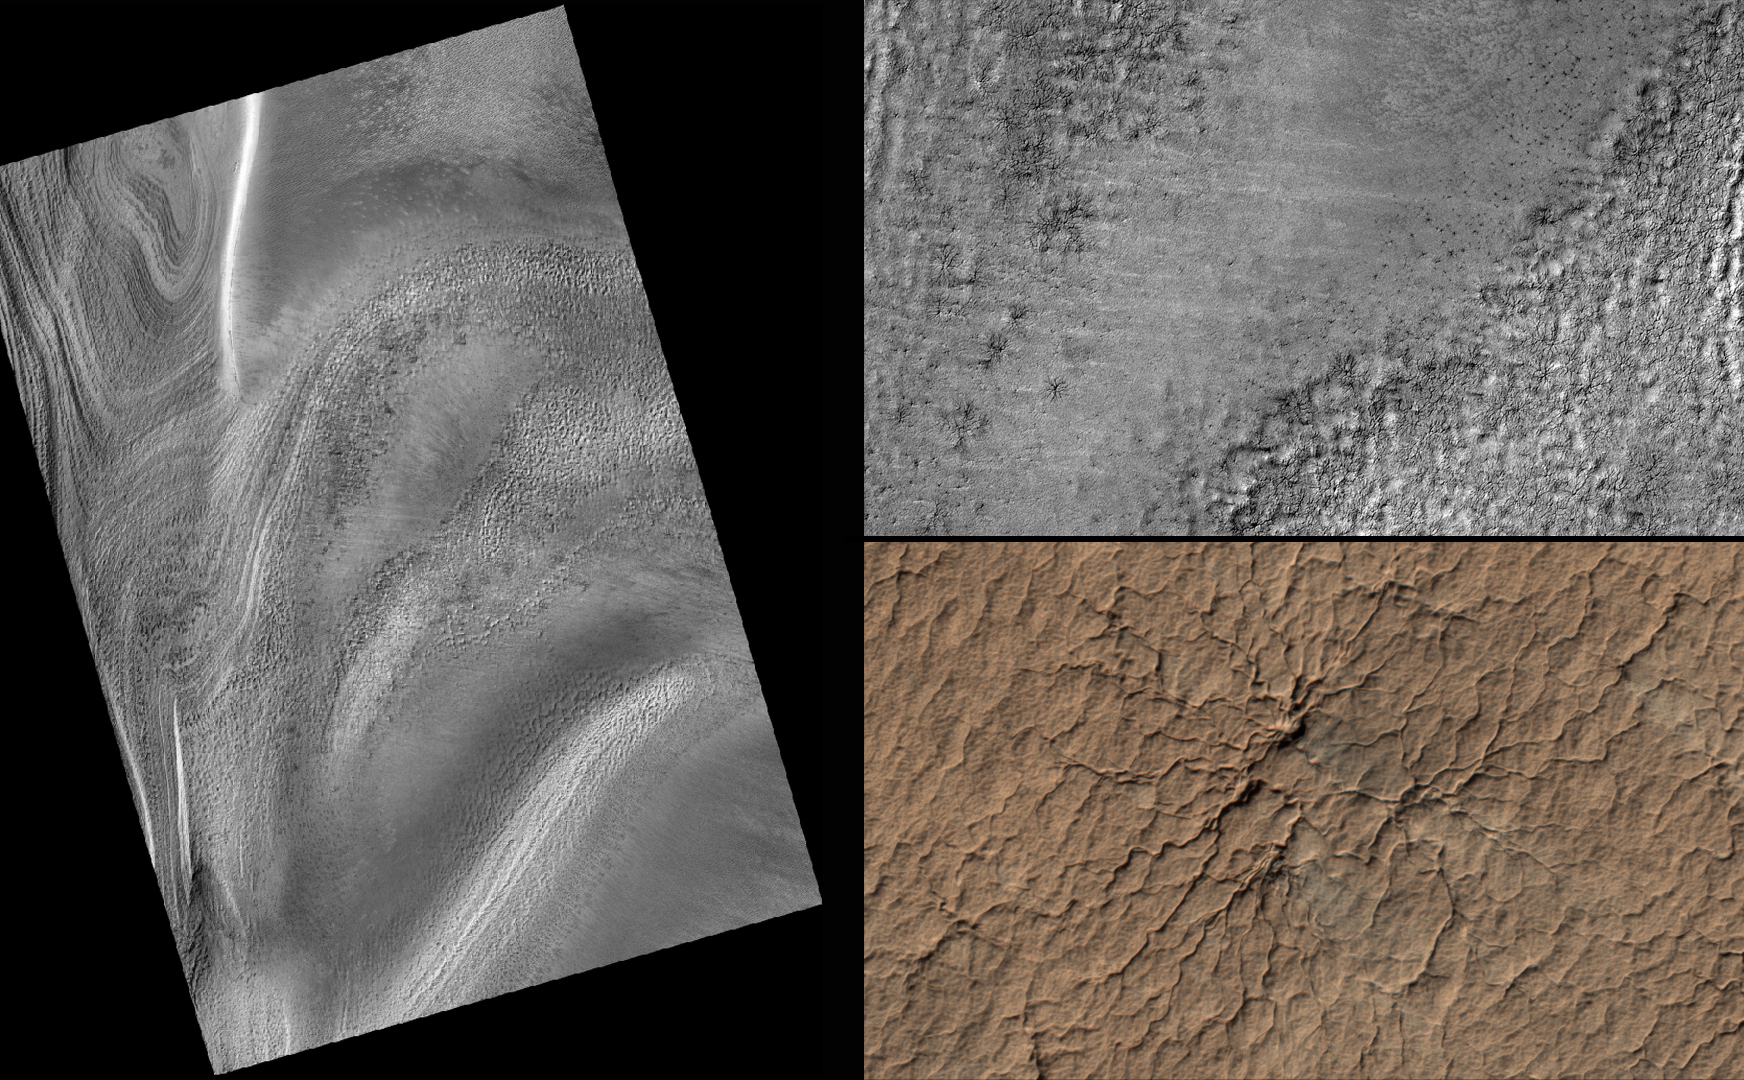 Volunteers Help Decide Where to Point Mars Camera